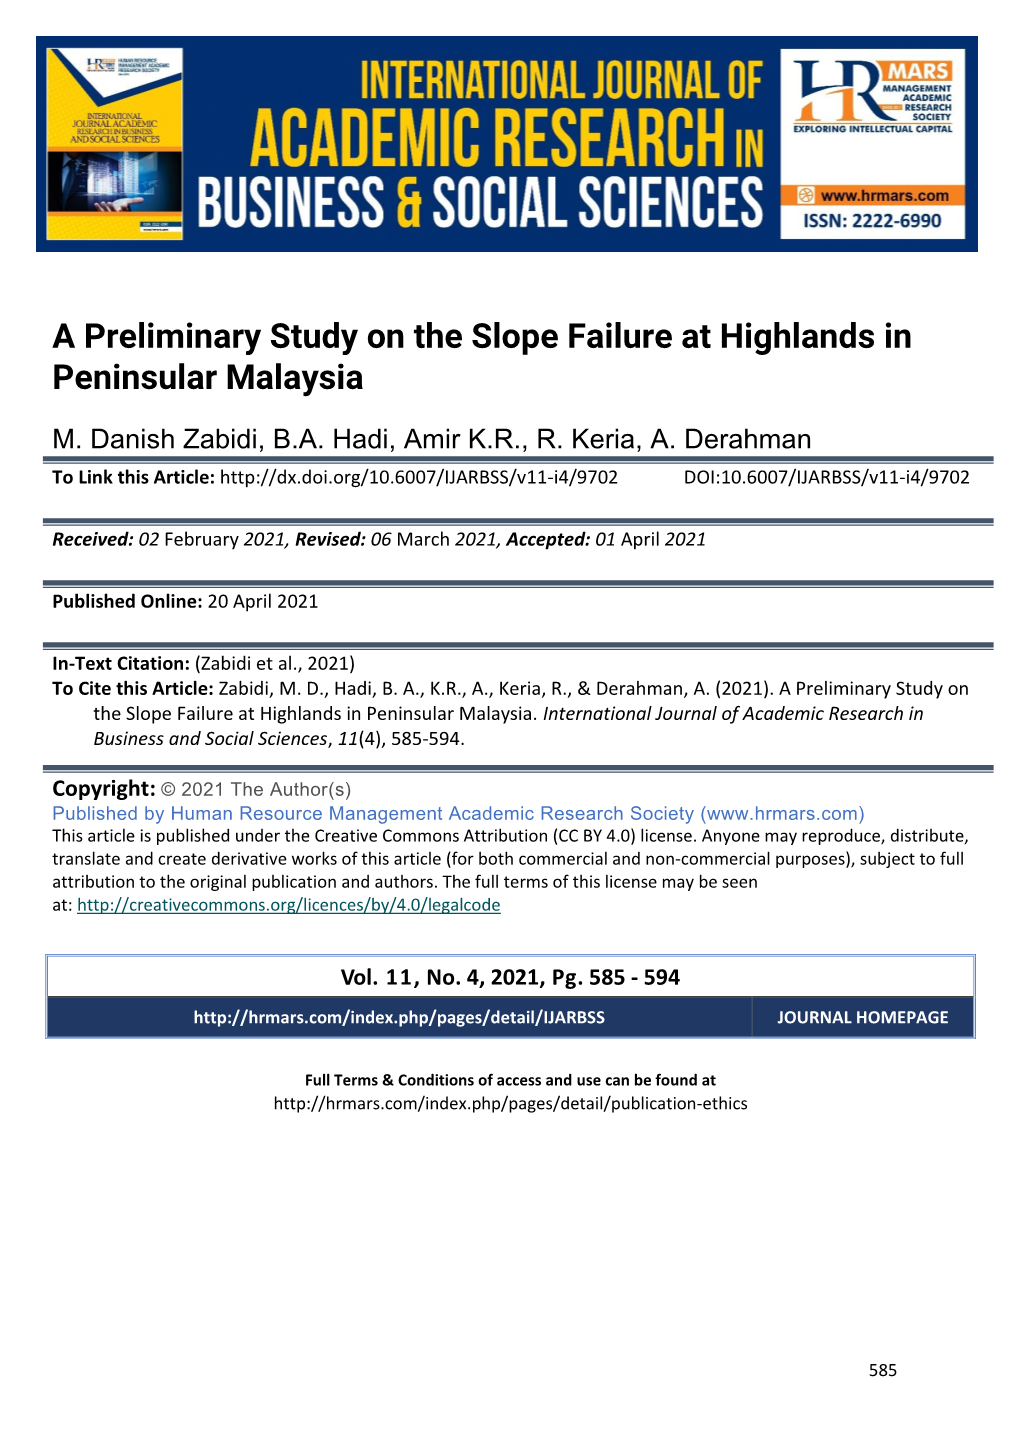 A Preliminary Study on the Slope Failure at Highlands in Peninsular Malaysia